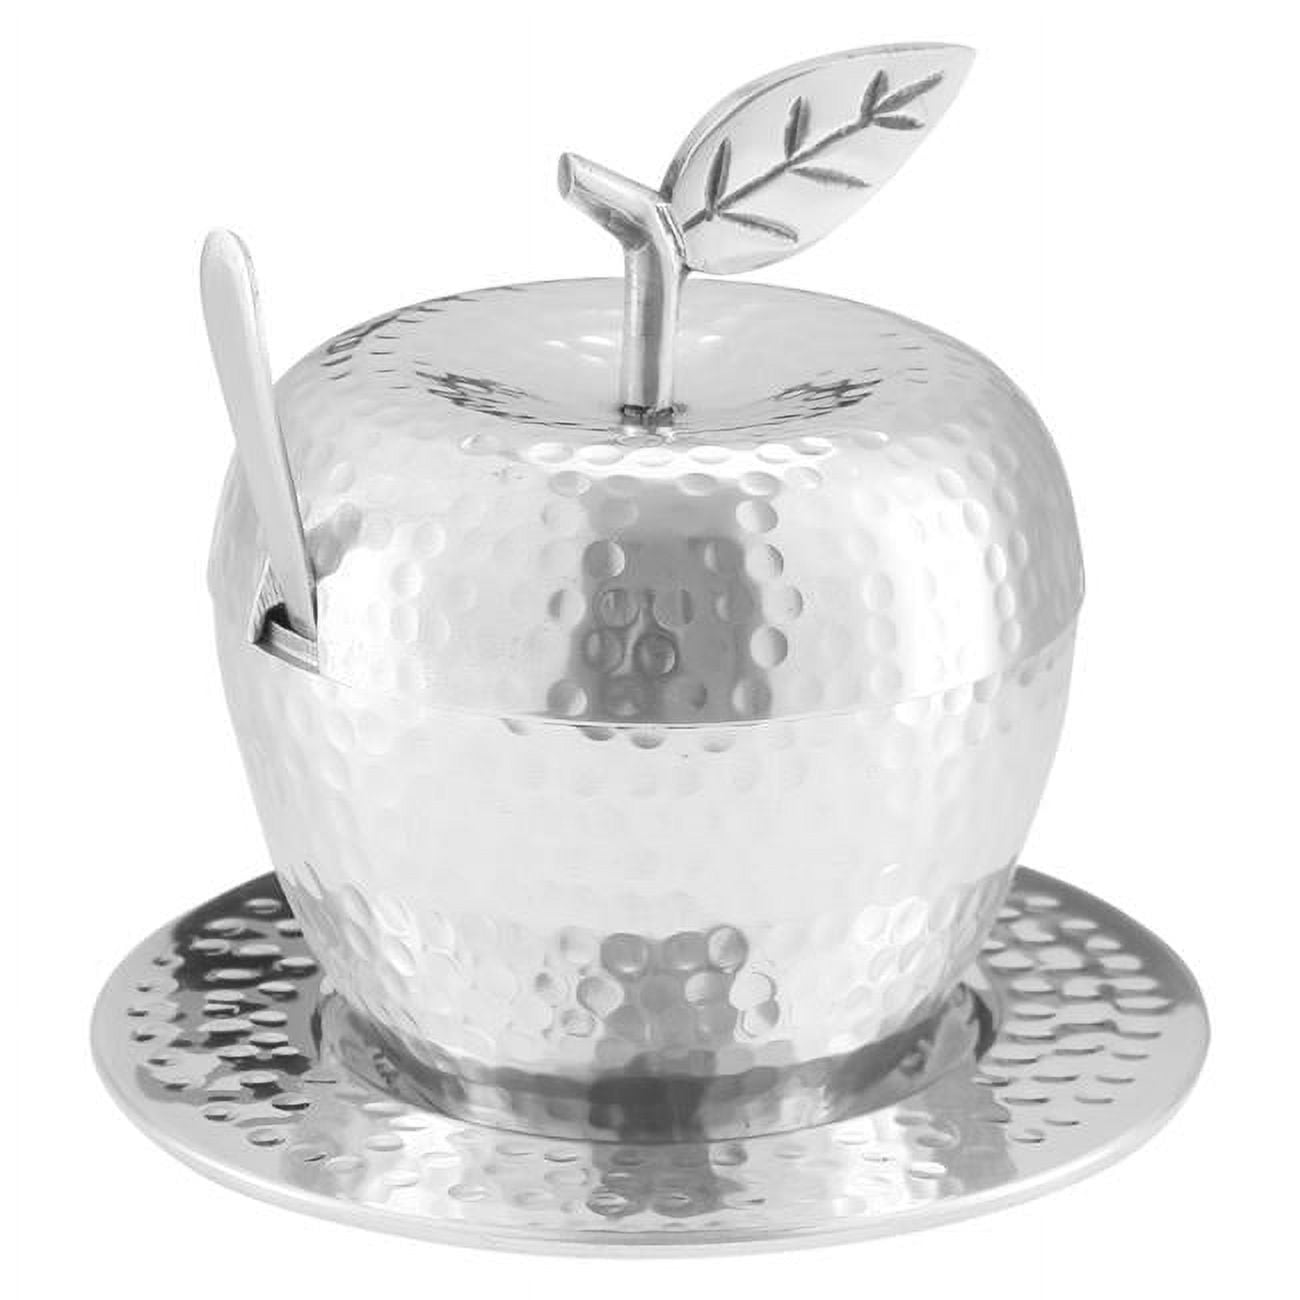 Picture of A&M Judaica & Gifts 59319 Nua Honey Dish Apple Shape Stainless Steel Hammered with Tray & Spoon